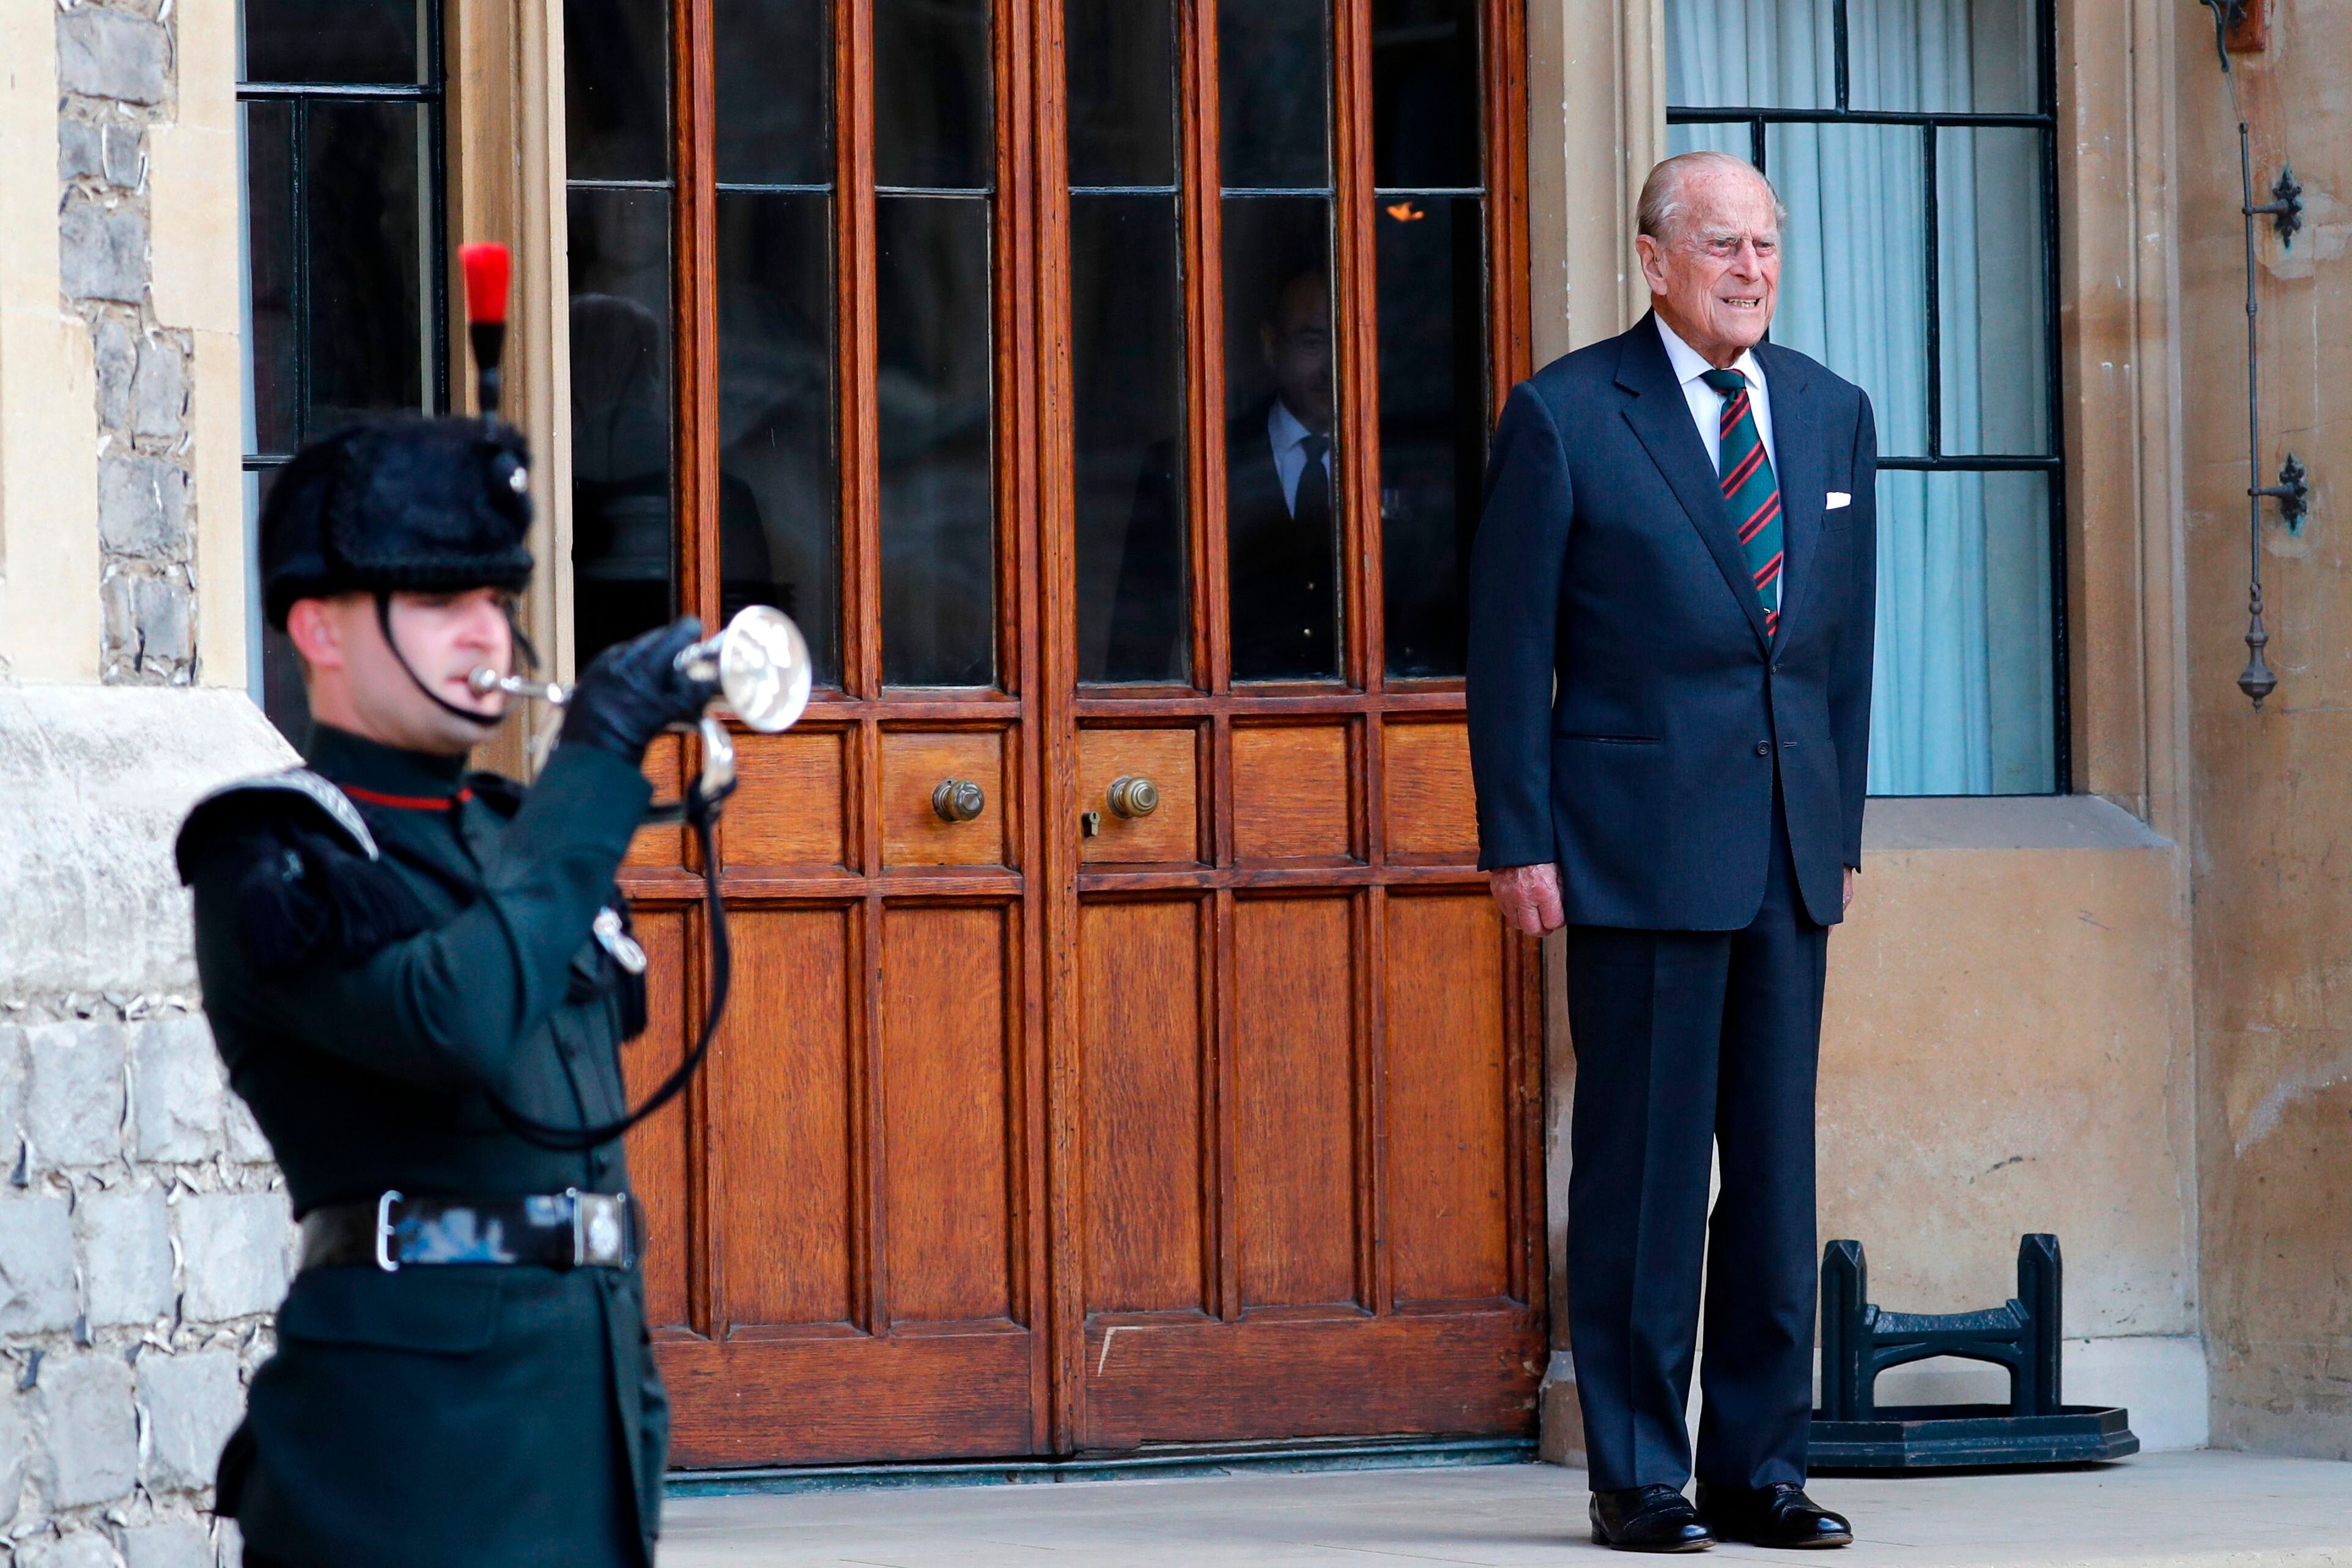 The Duke of Edinburgh listens to buglers during the transfer of the Colonel-in-Chief of The Rifles at Windsor castle in Winds